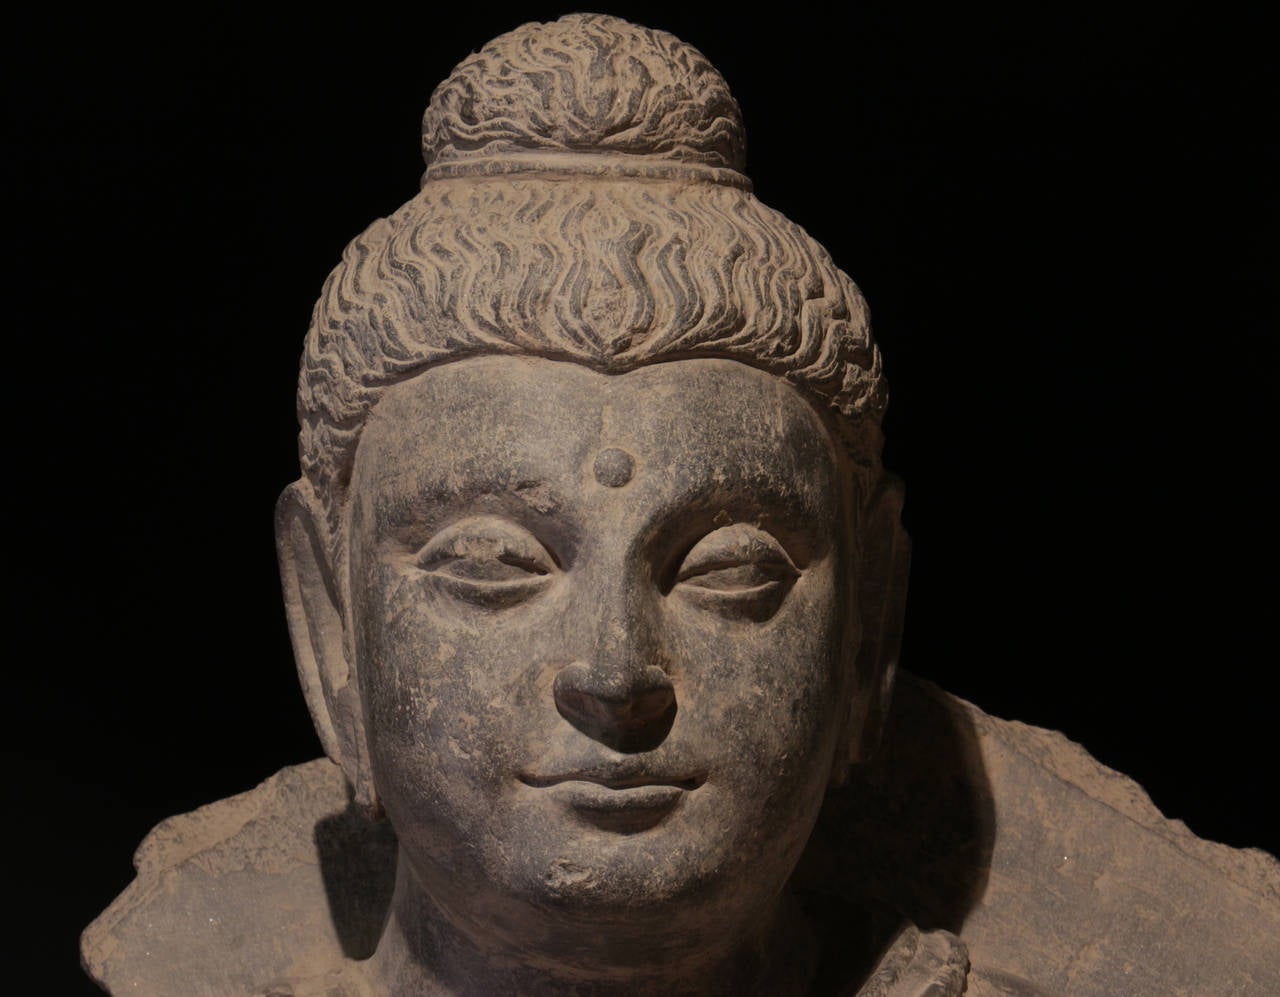 Asian Exceptional 1700 Year Old, Lifesize, Museum Quality Stone Buddha Sculpture For Sale